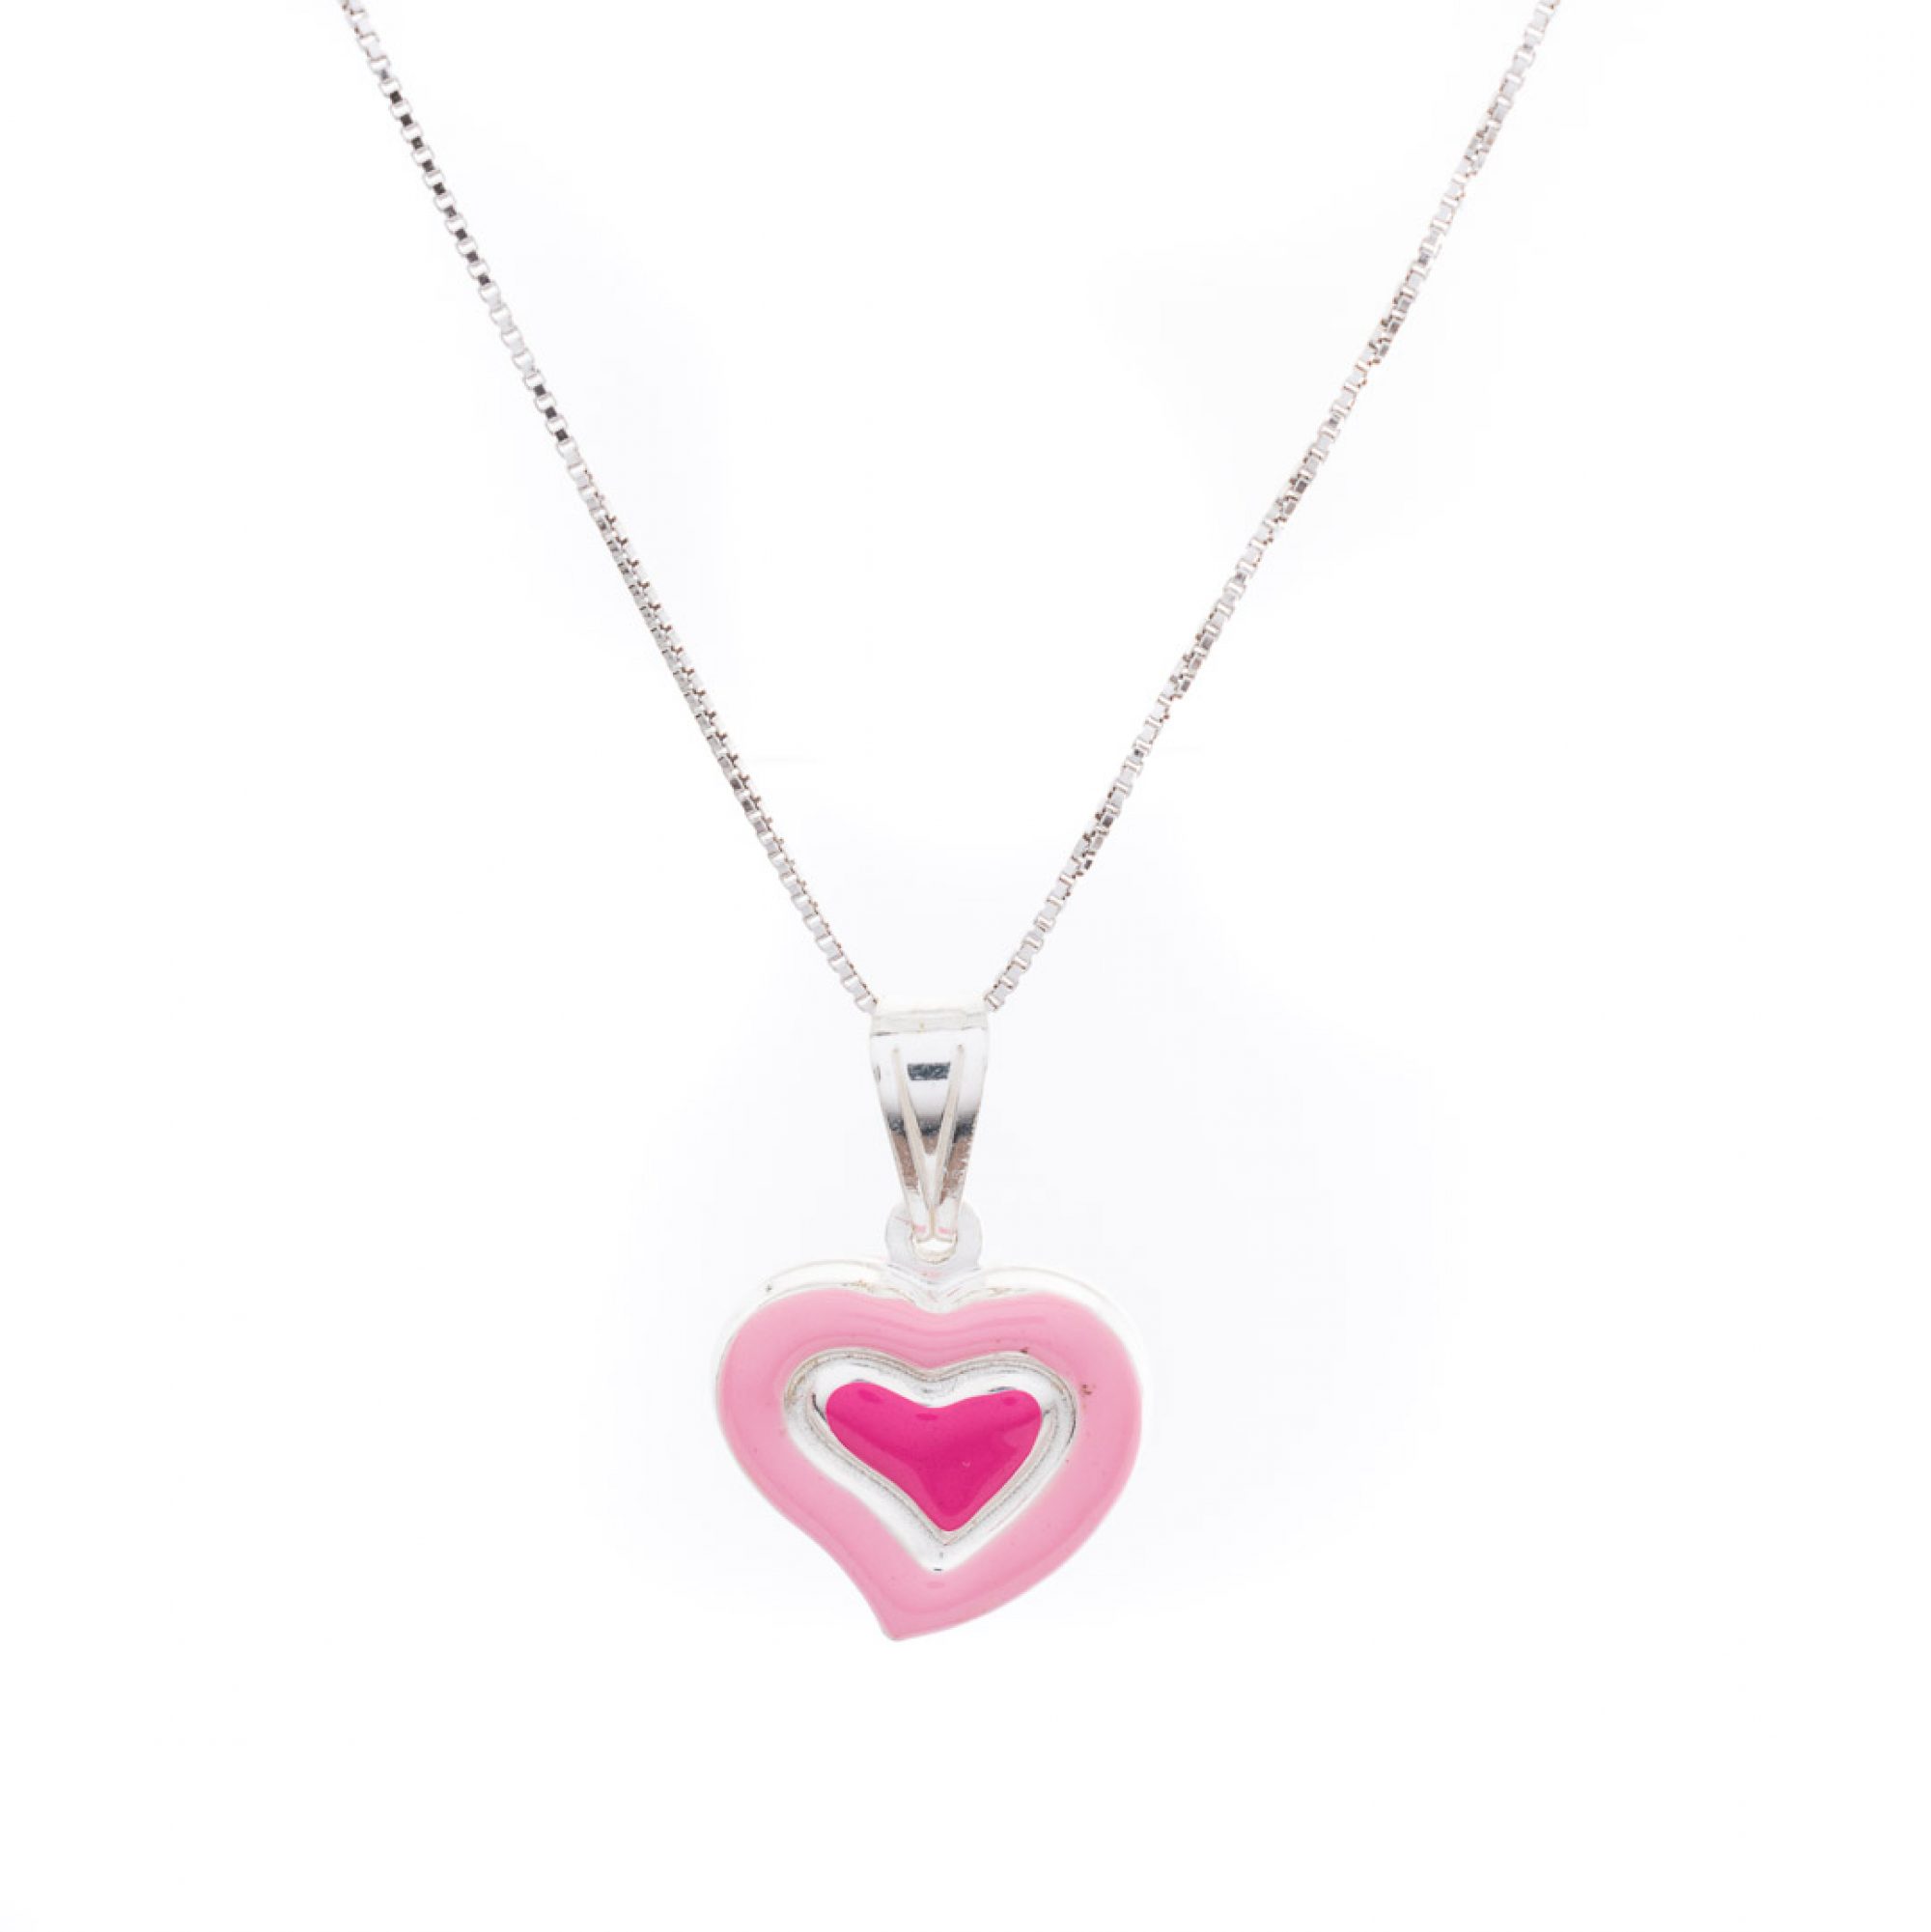 Heart necklace with enamel